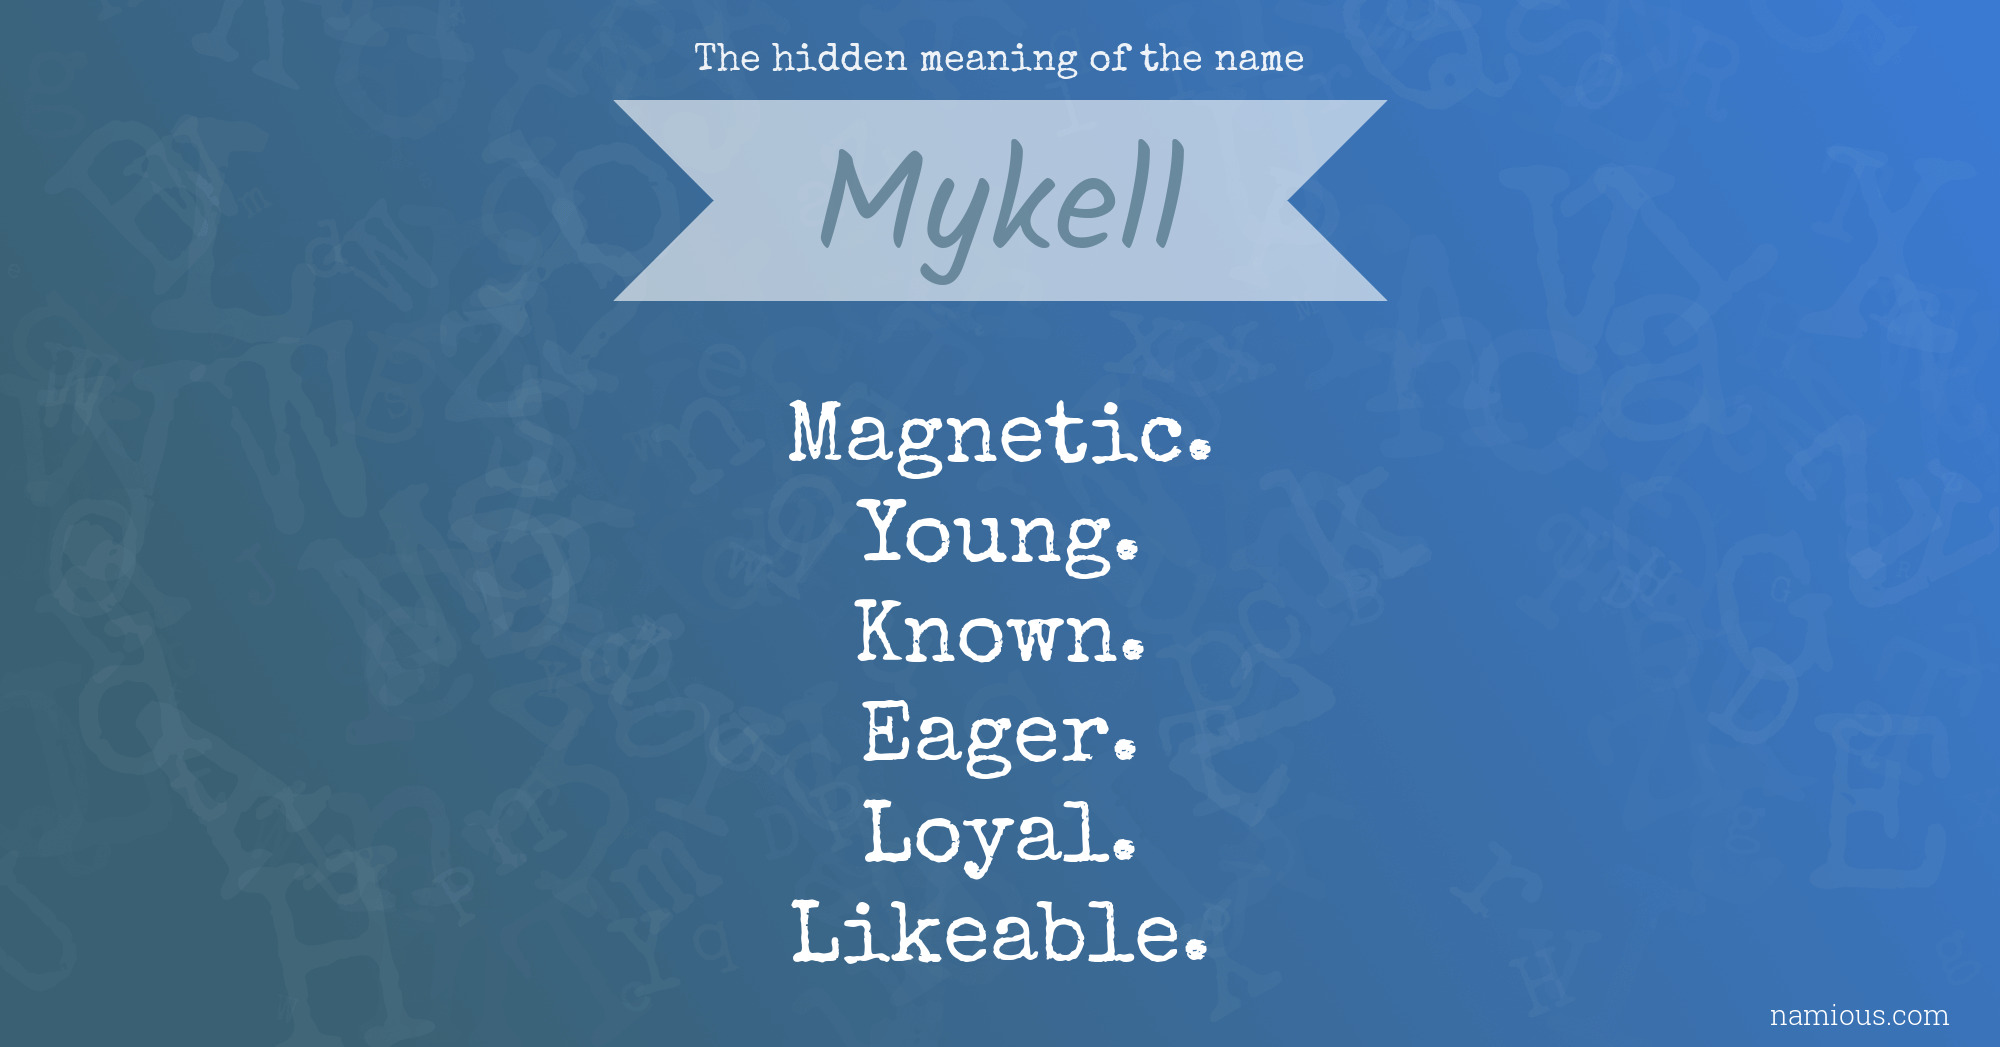 The hidden meaning of the name Mykell